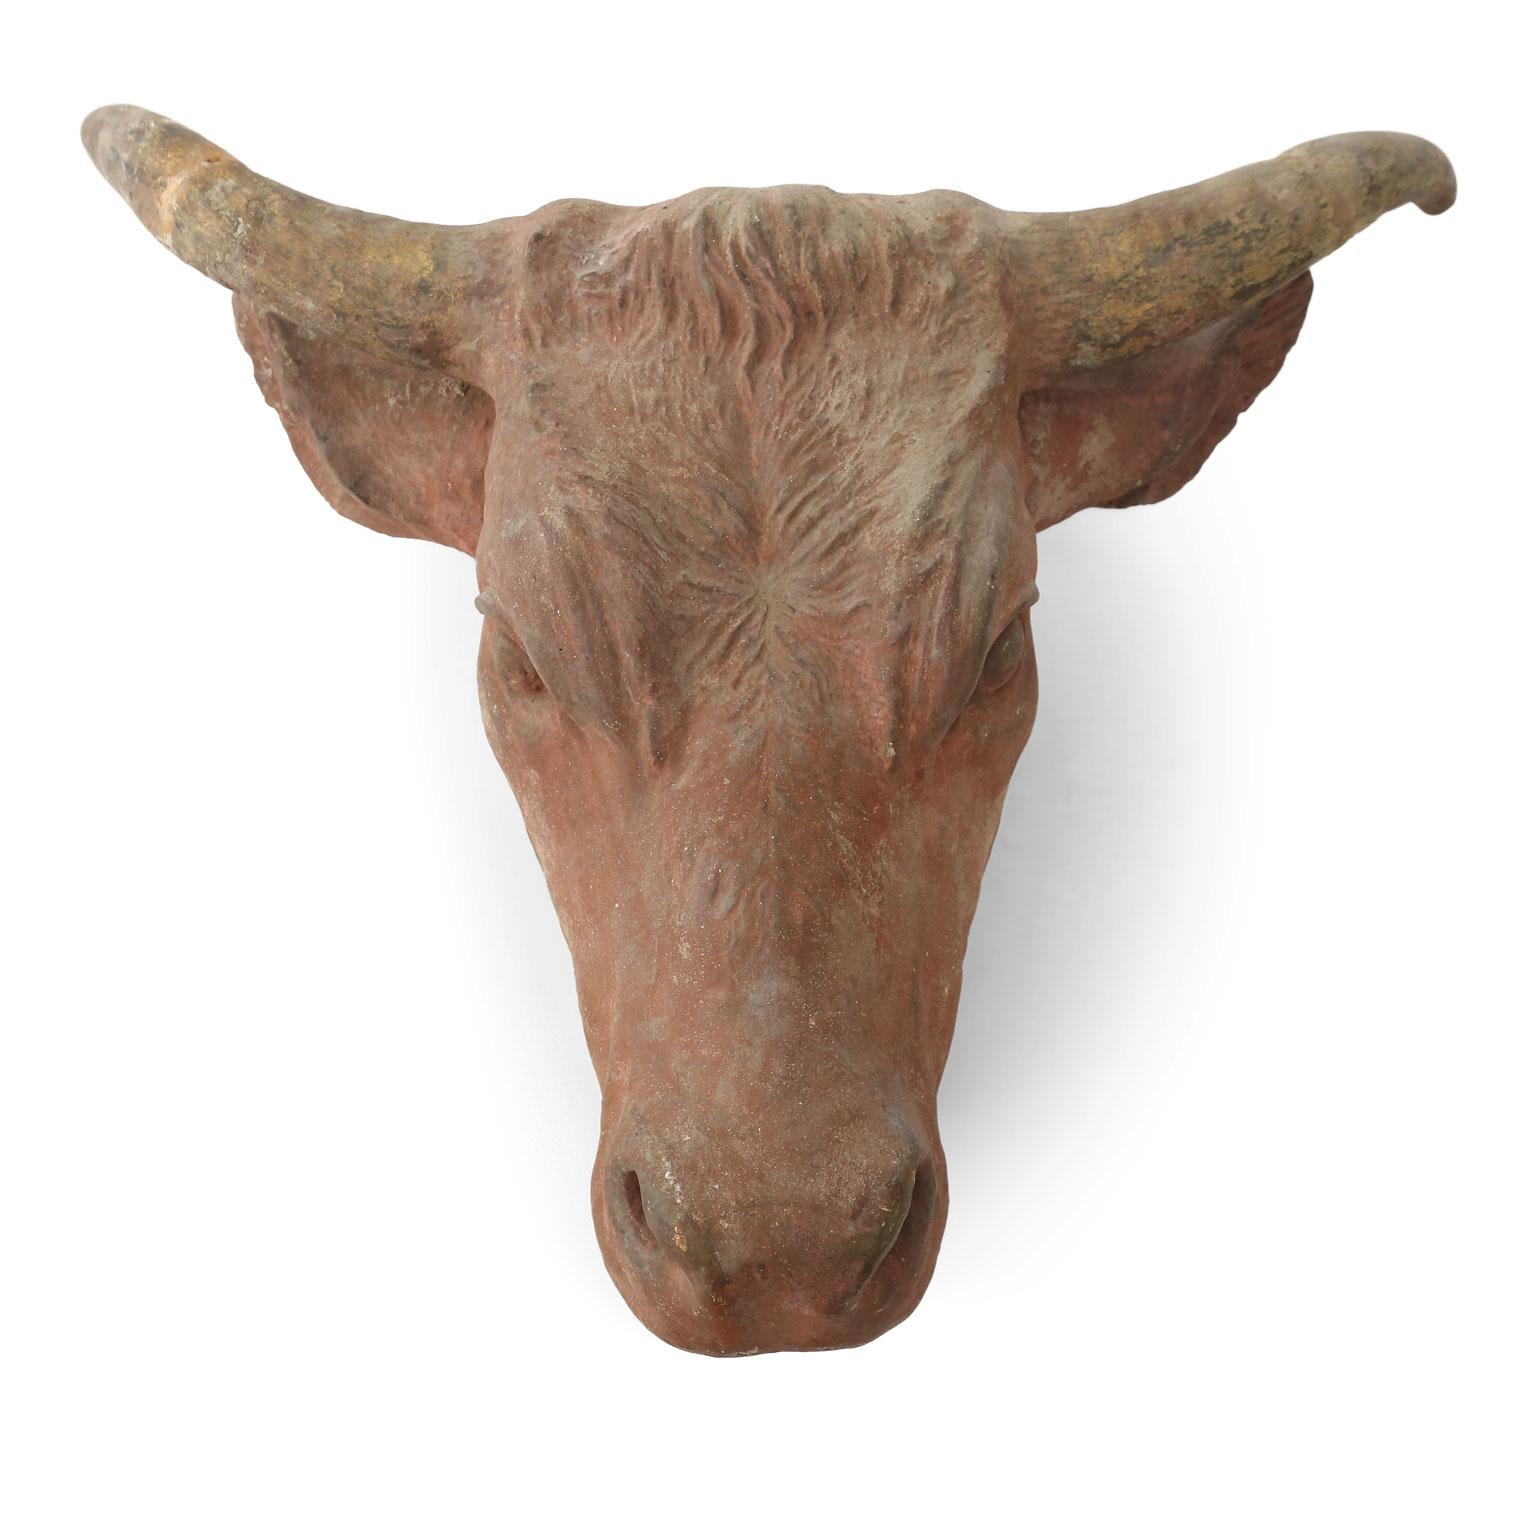 Wonderfully detailed concrete cow head (tête de vache) architectural element. Painted in subtle soft, yet realistic color. Iron bar hidden inside back of the neck for easier wall installation.